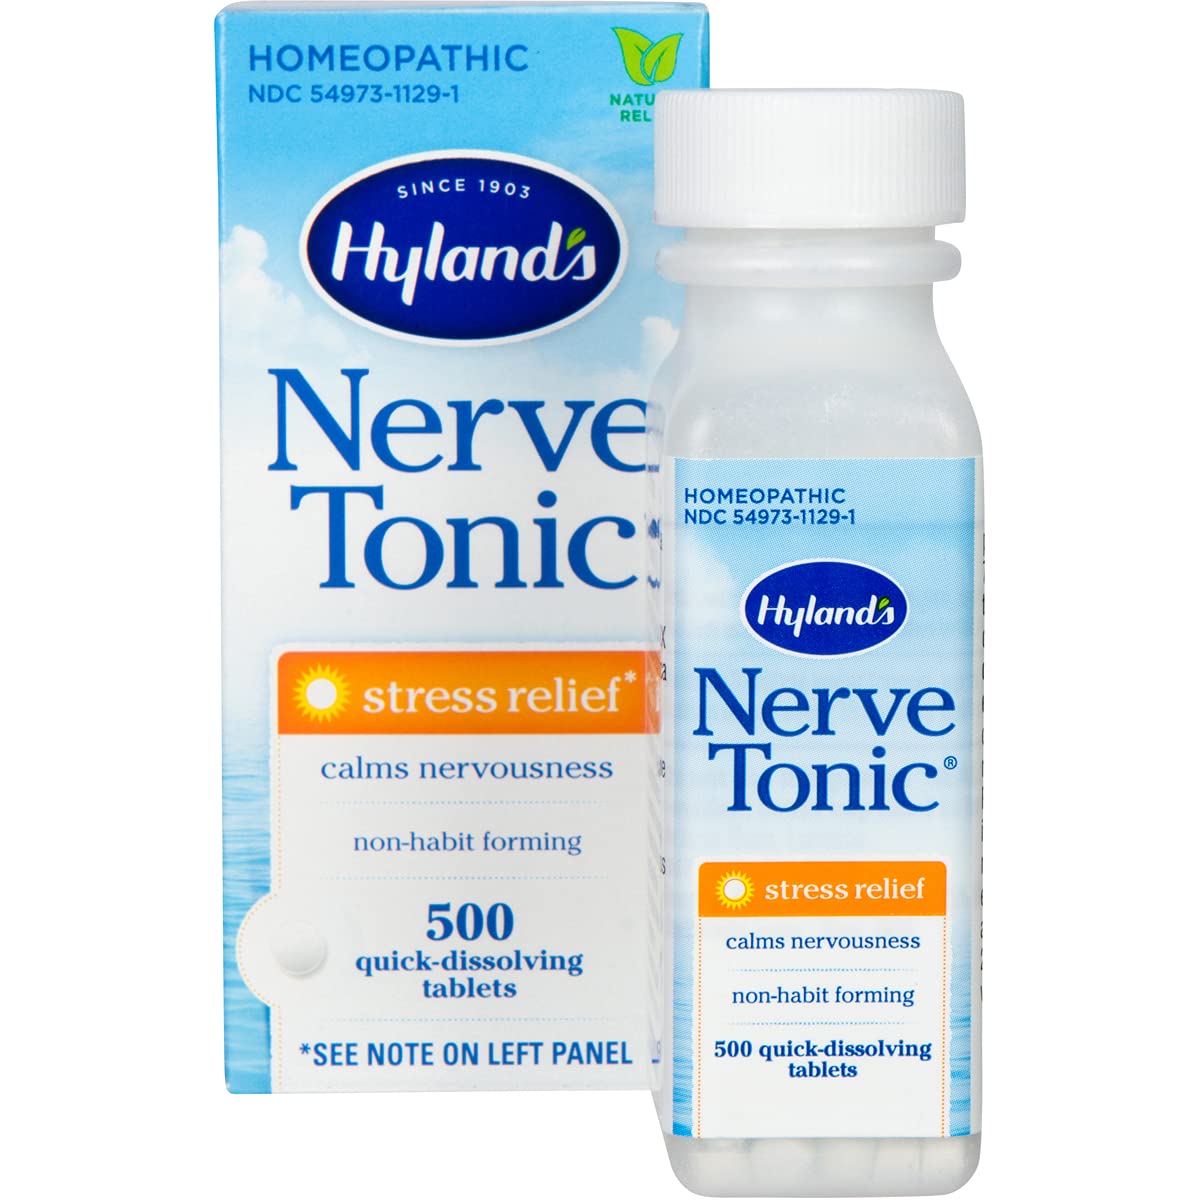 Hyland’s Nerve Tonic Stress Relief Tablets, Natural Relief of Restlessness, Nervousness and Irritability Symptoms, Non-Habit Forming, 500 Count